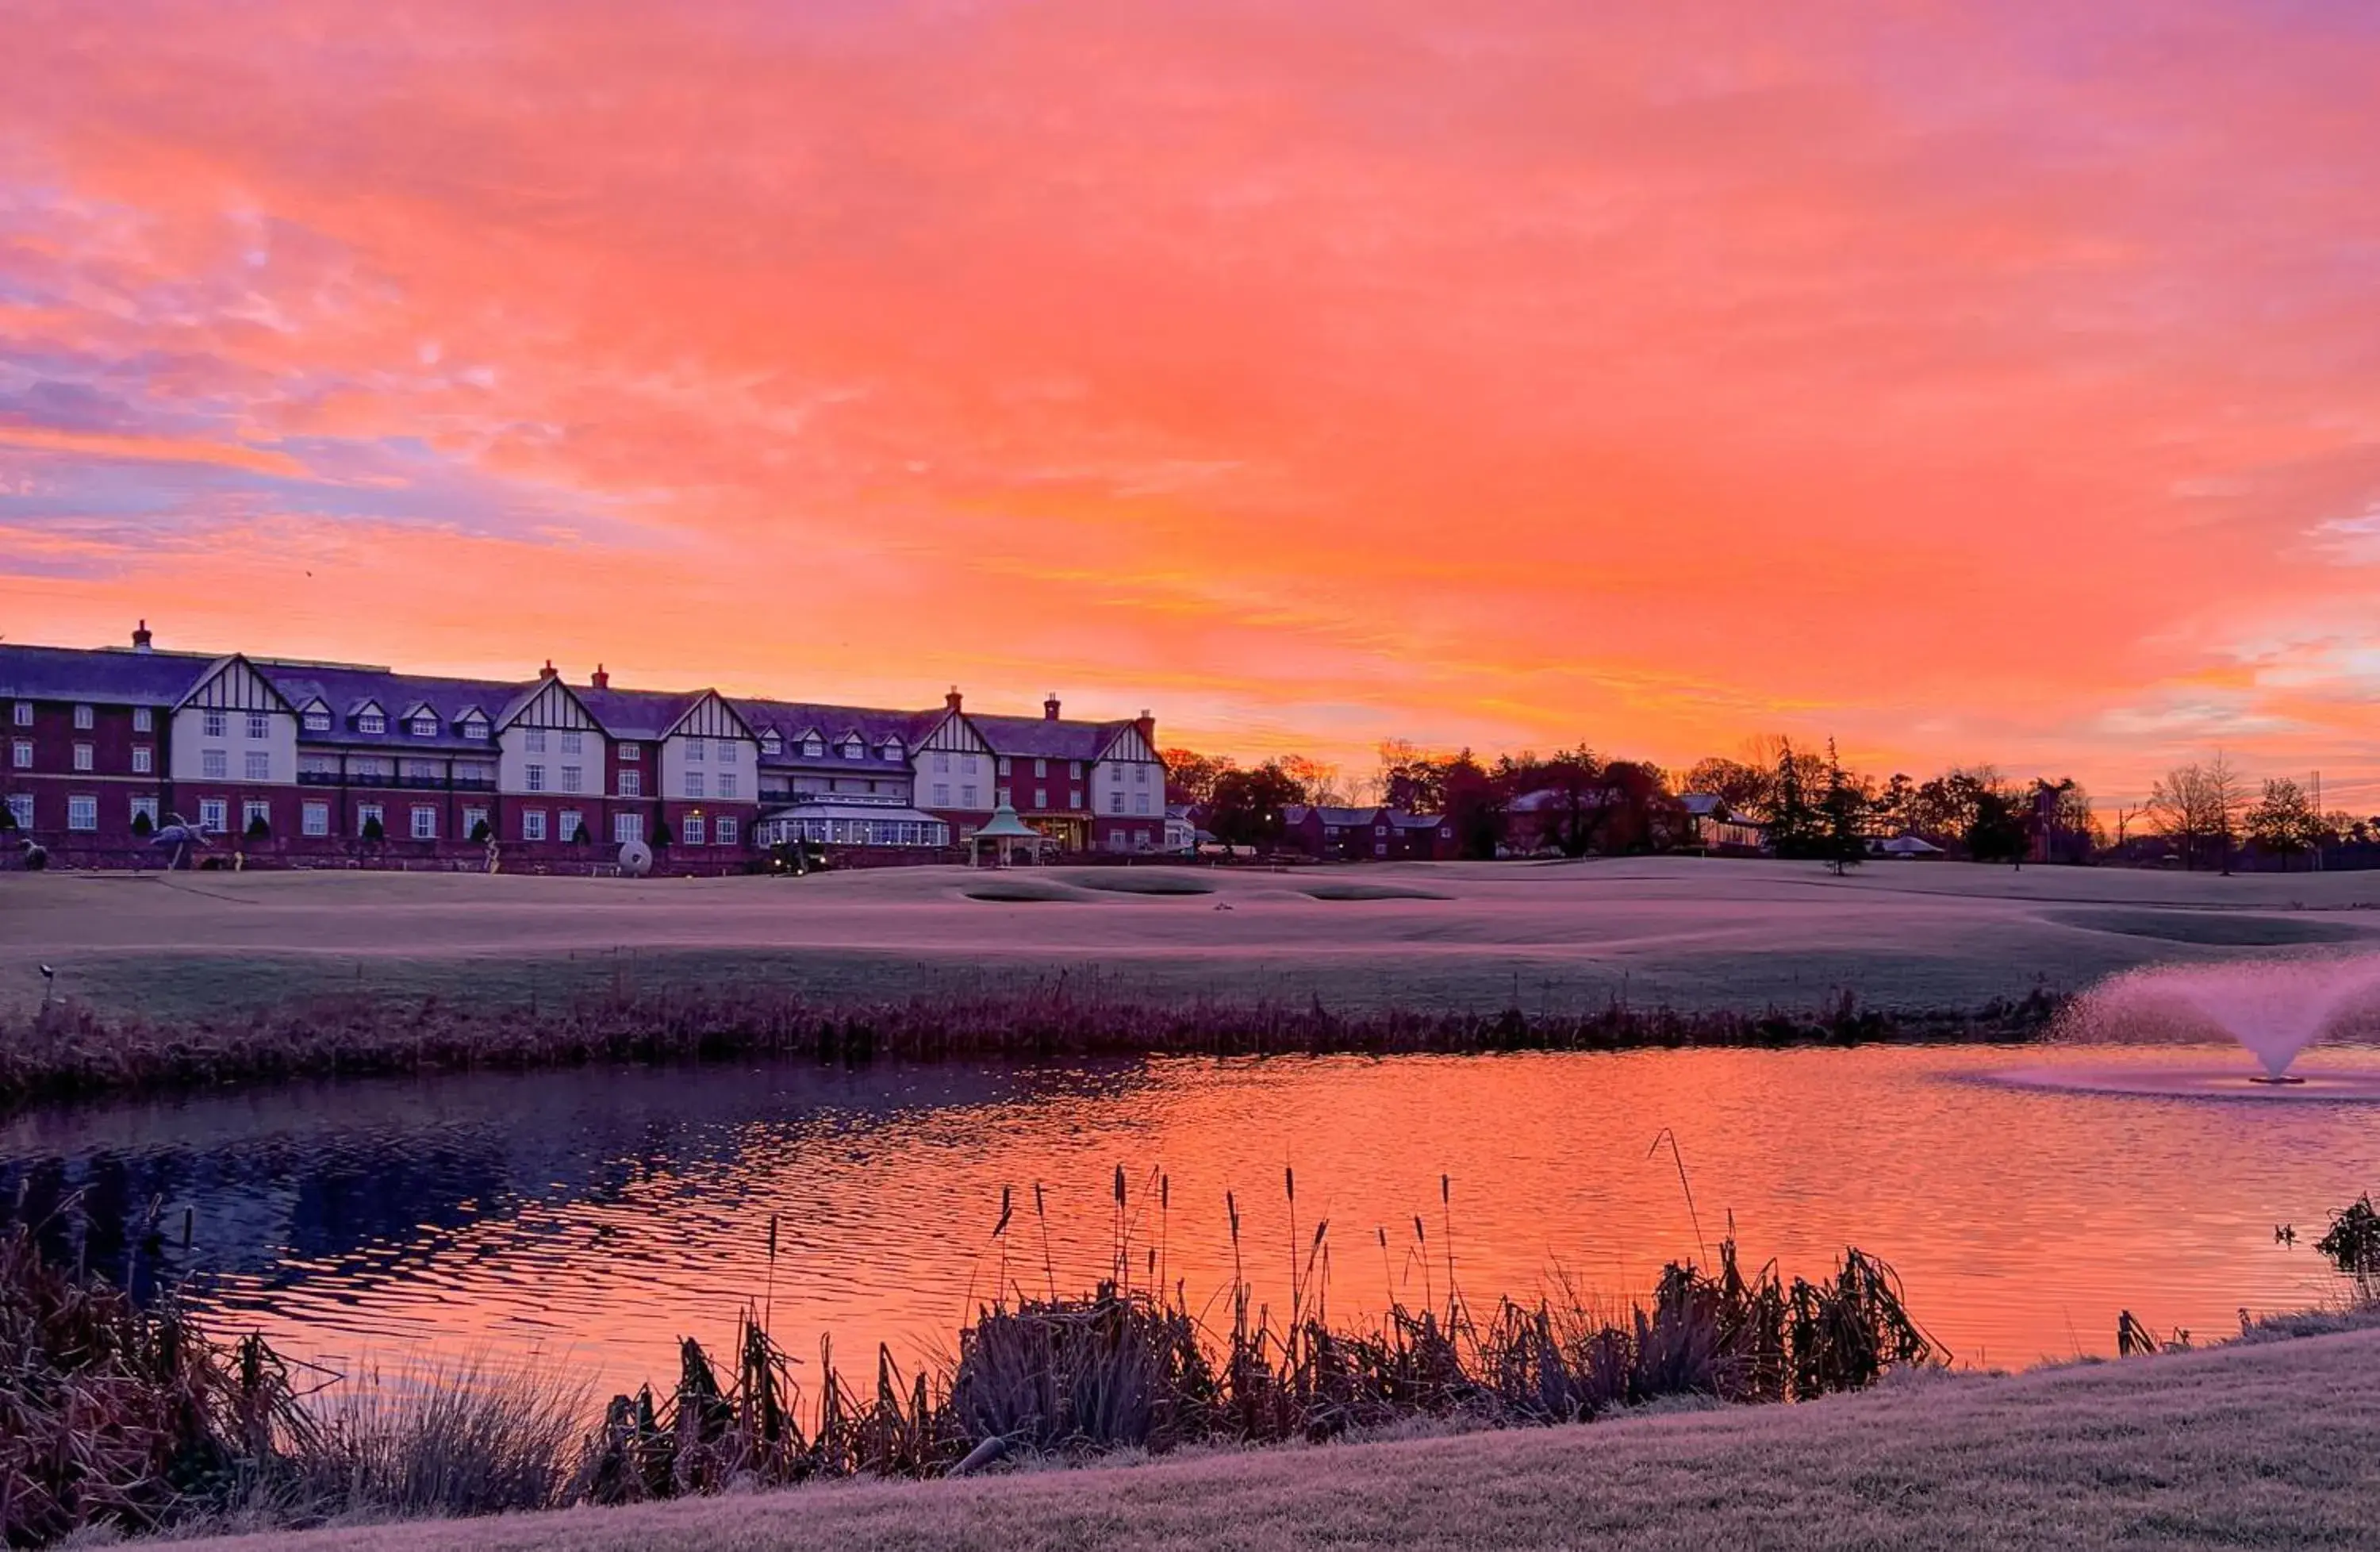 Property building, Sunrise/Sunset in Carden Park Hotel, Golf Resort and Spa